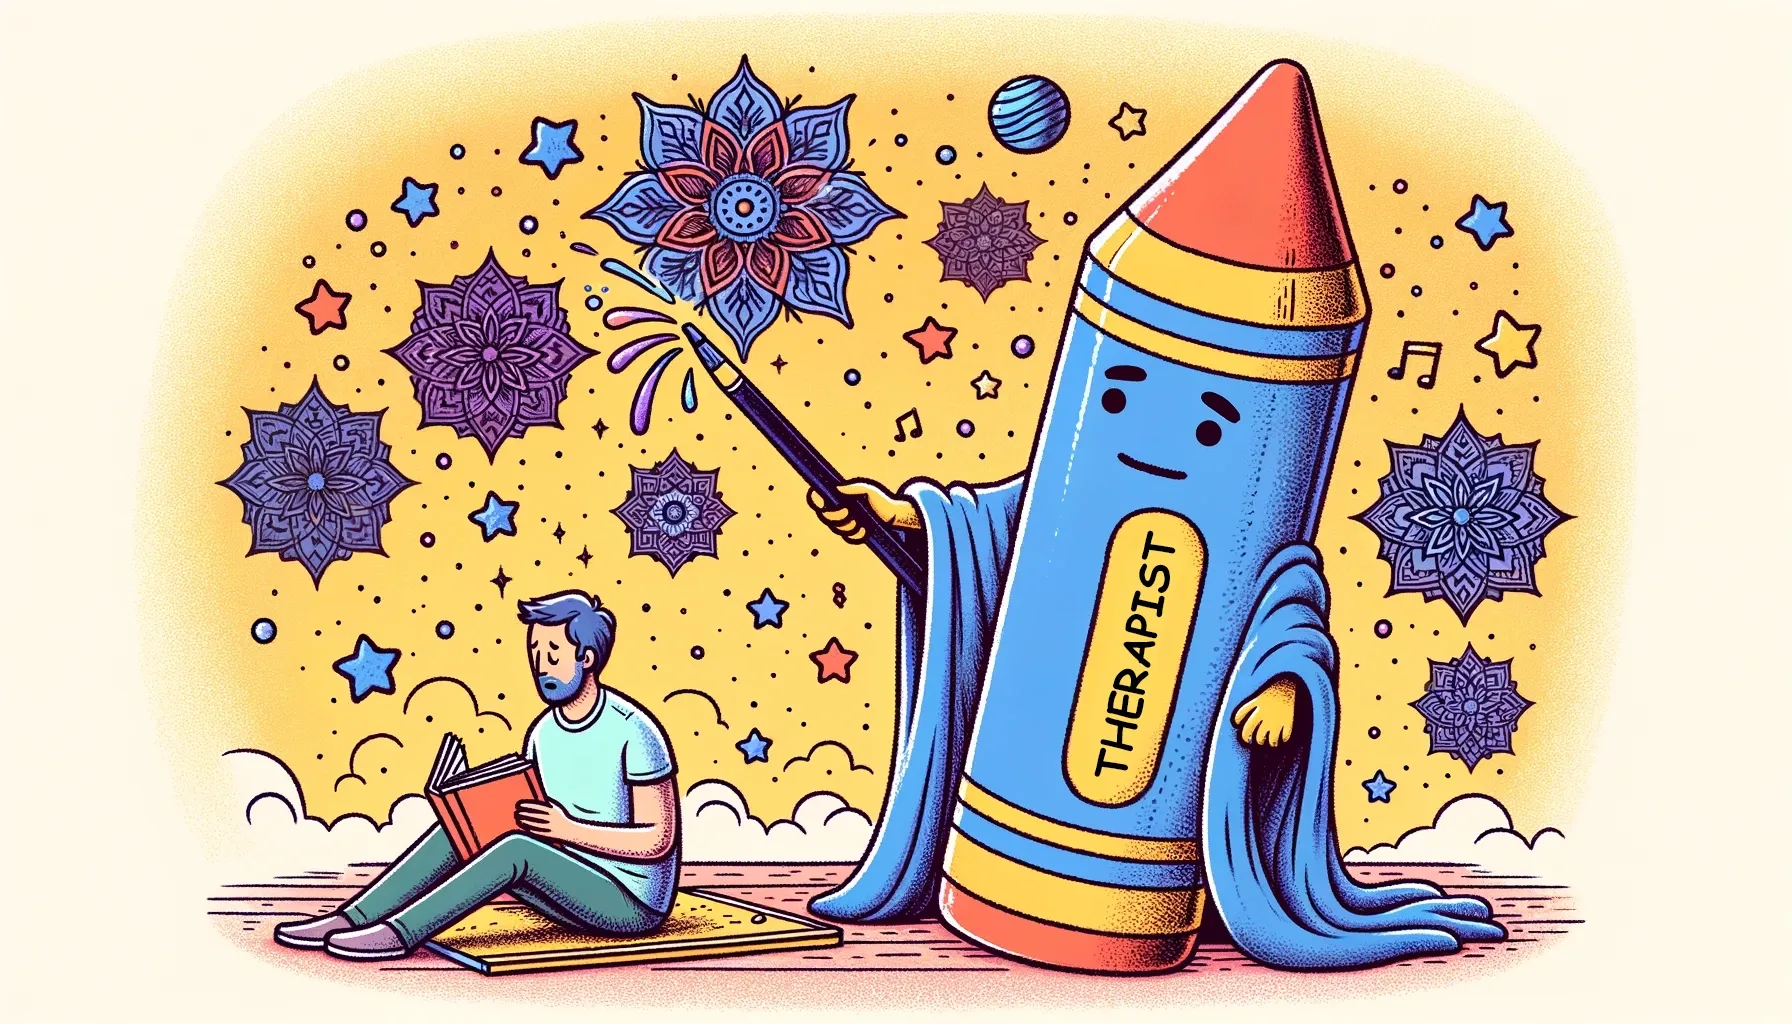 Wide doodle illustration: A giant crayon labeled 'Therapist' acting as a magic wand. As it touches a stressed individual's head, they transform into a relaxed person with a coloring book in hand, surrounded by floating mandalas.